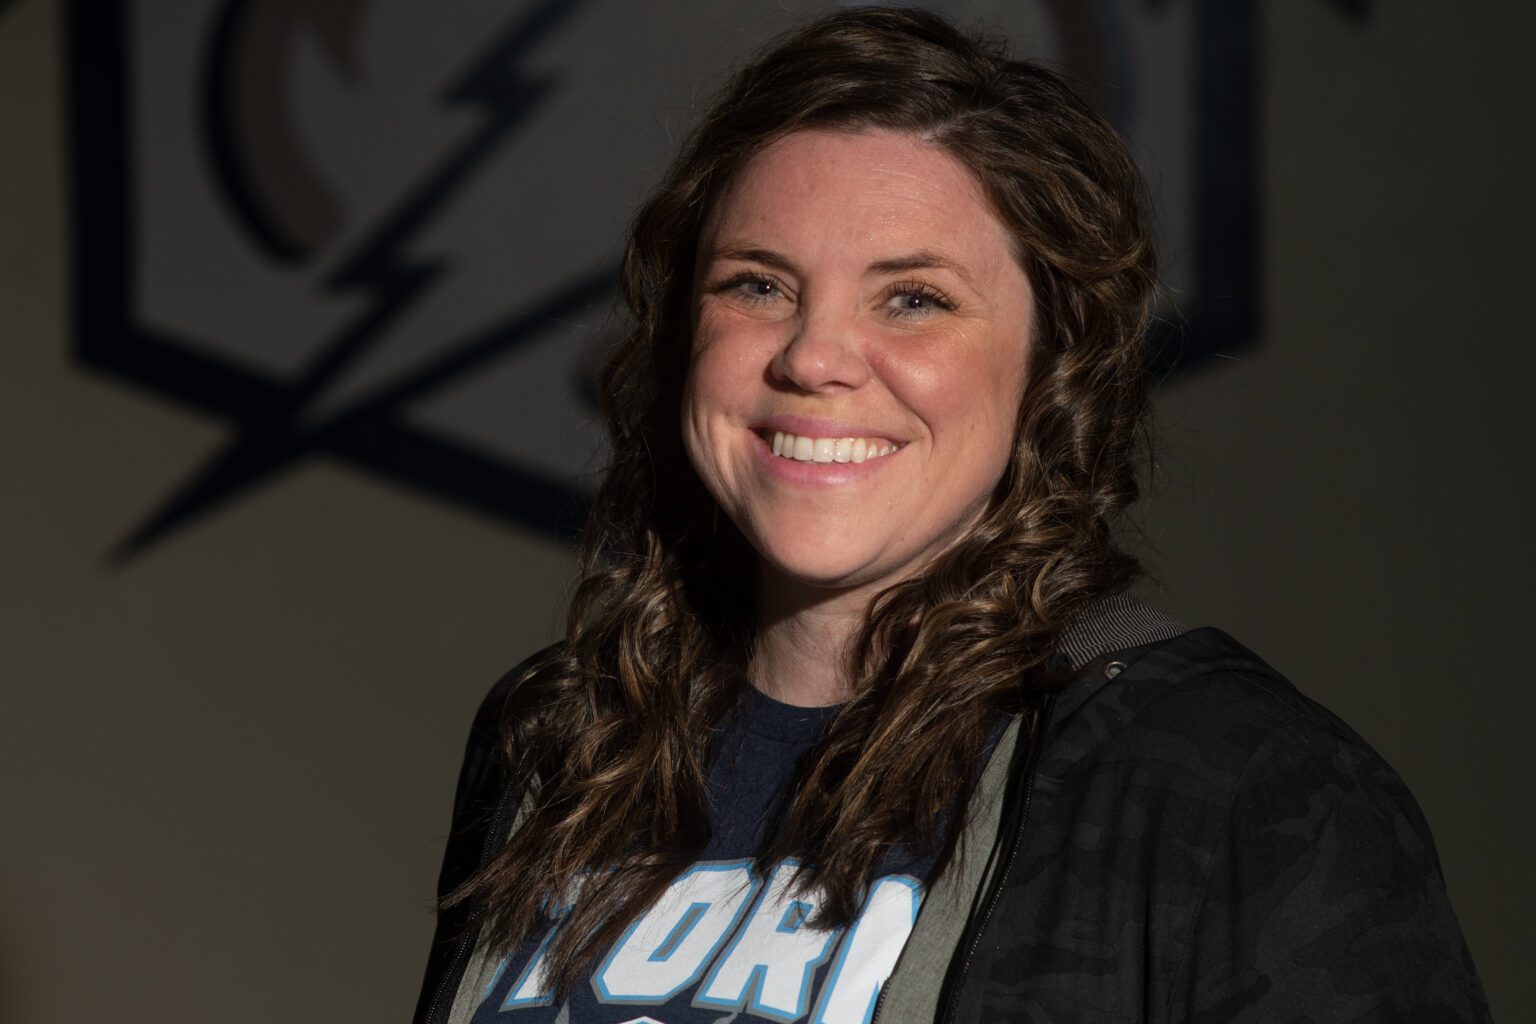 Squalicum High School cross country and track and field coach Erin Hoopes